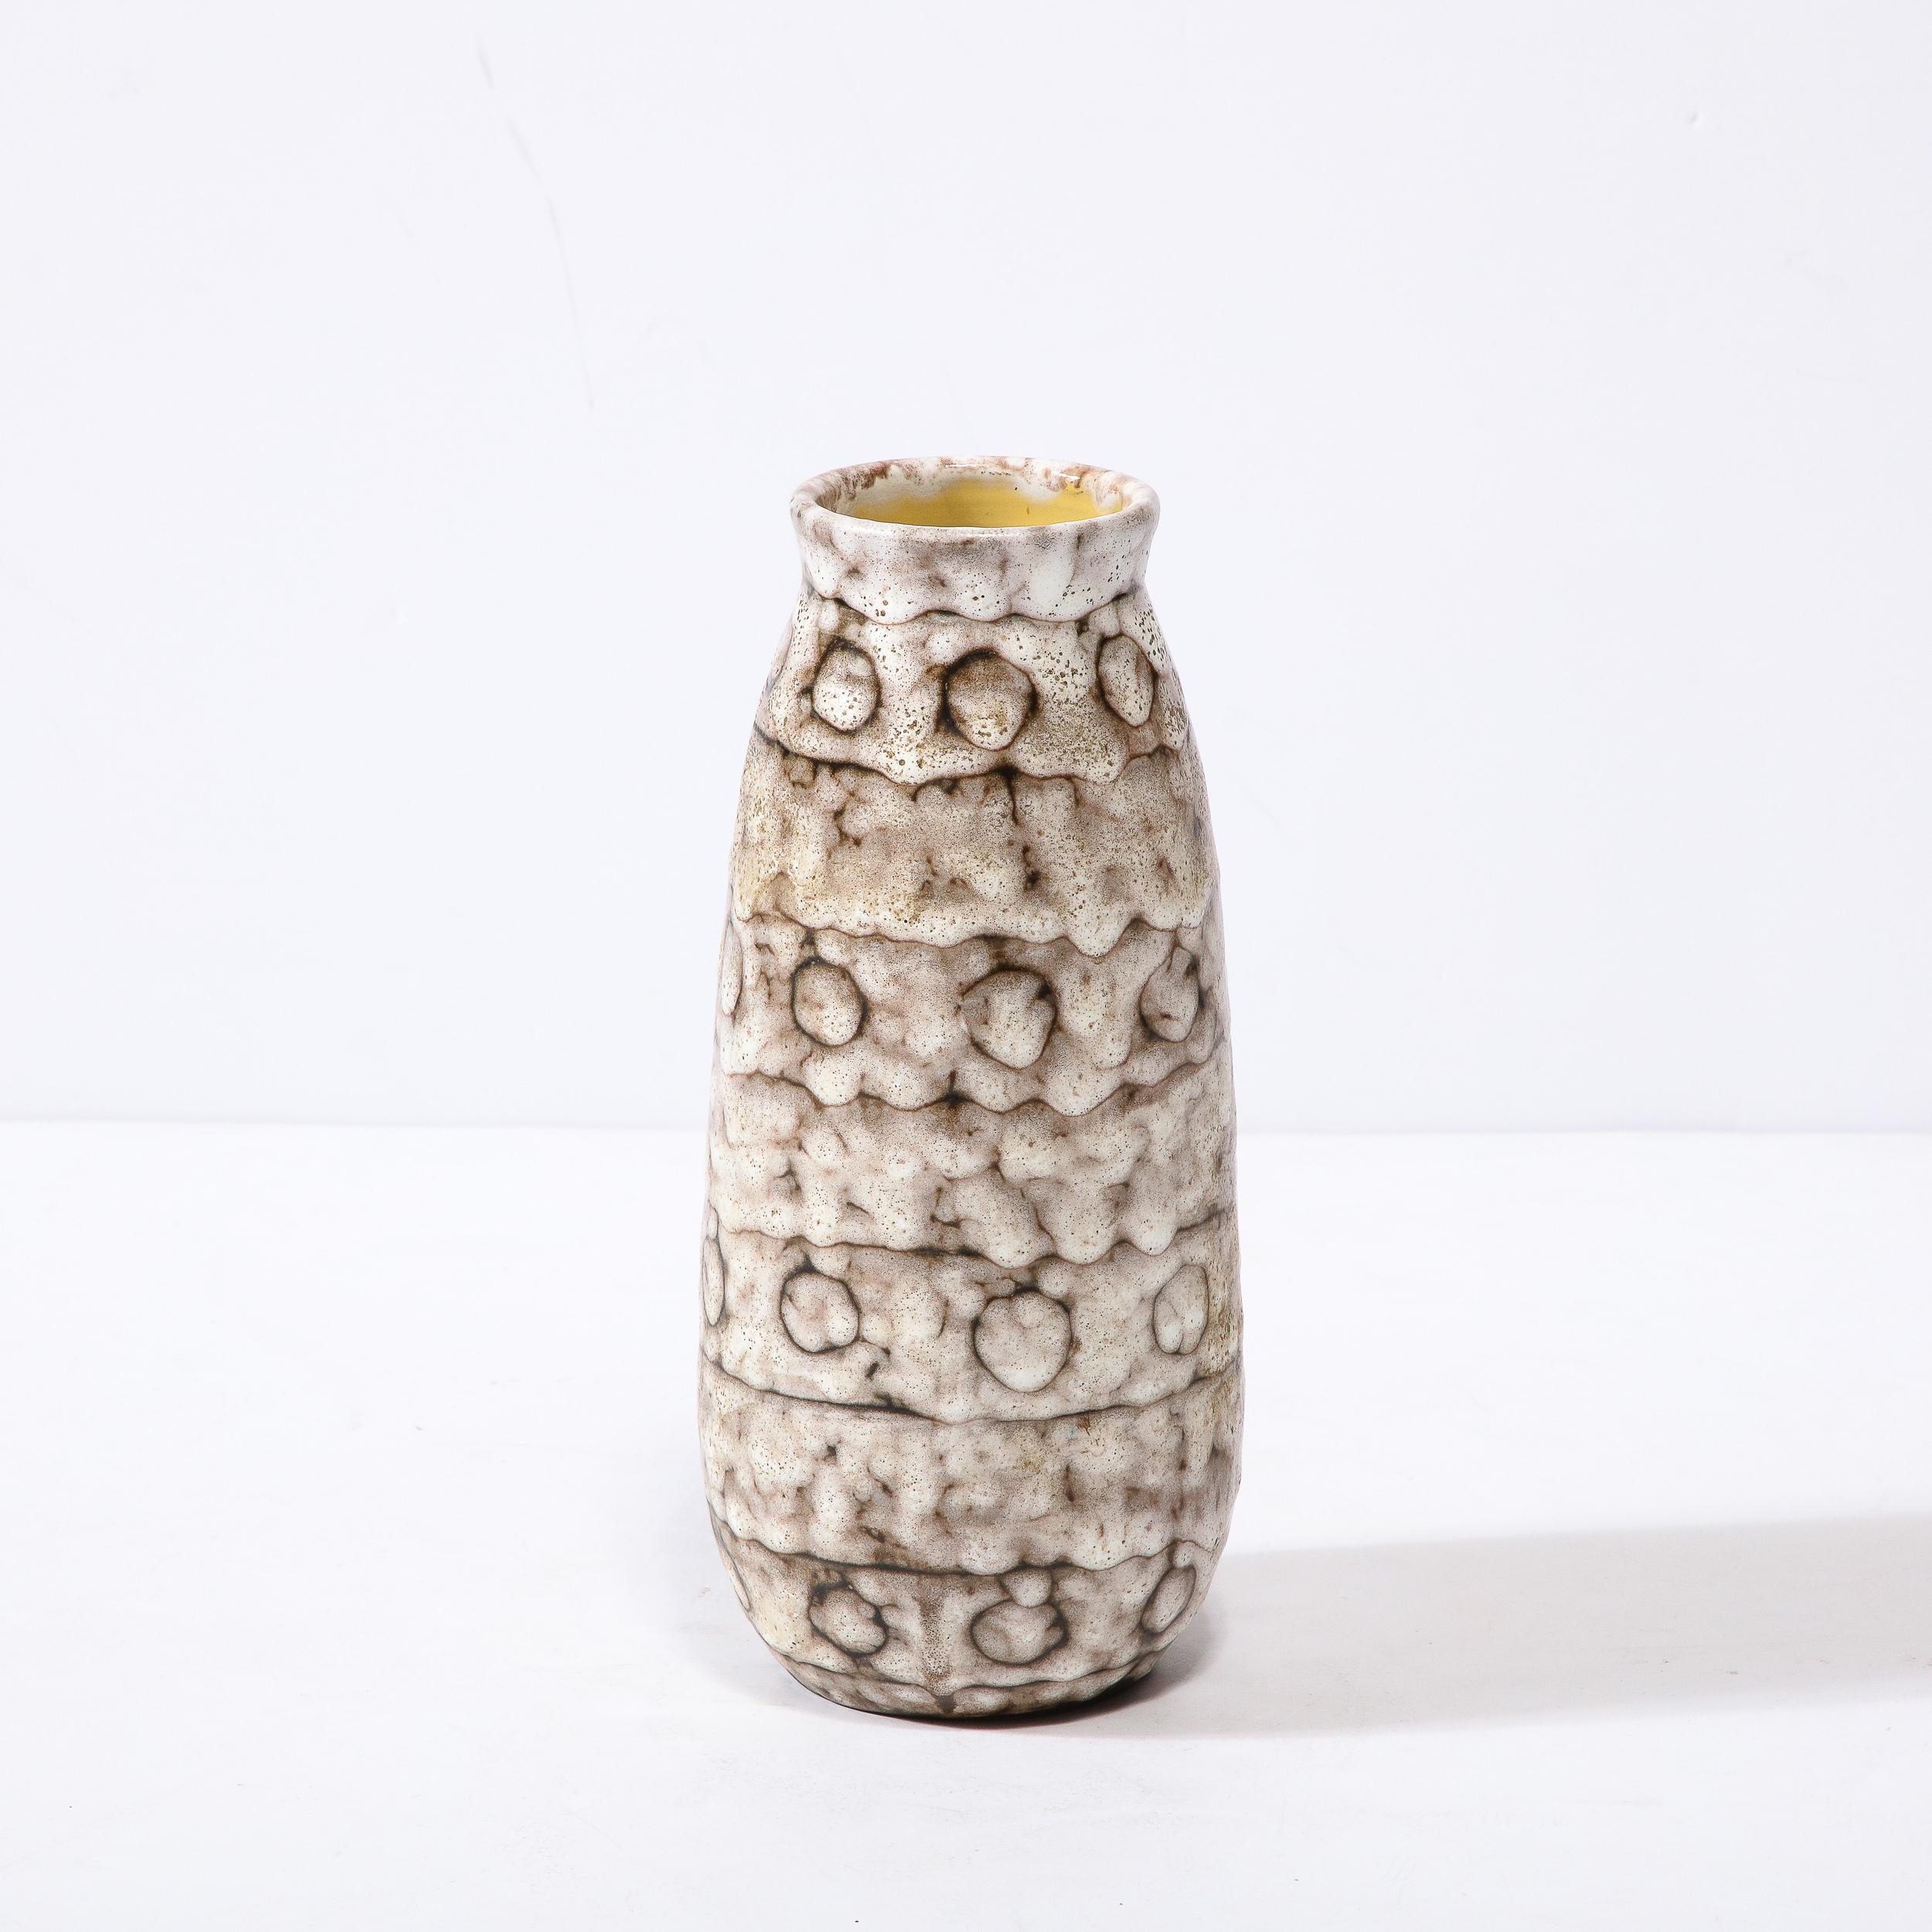 This Mid-Century Modernist Ceramic Vase with Spotted Banding is a beautiful example of Post War European Ceramics, realized in Hódmezovasarhely Majolikagyár, Hungary circa 1960. With a Stunning textural finish composed in Cream White and Blackened